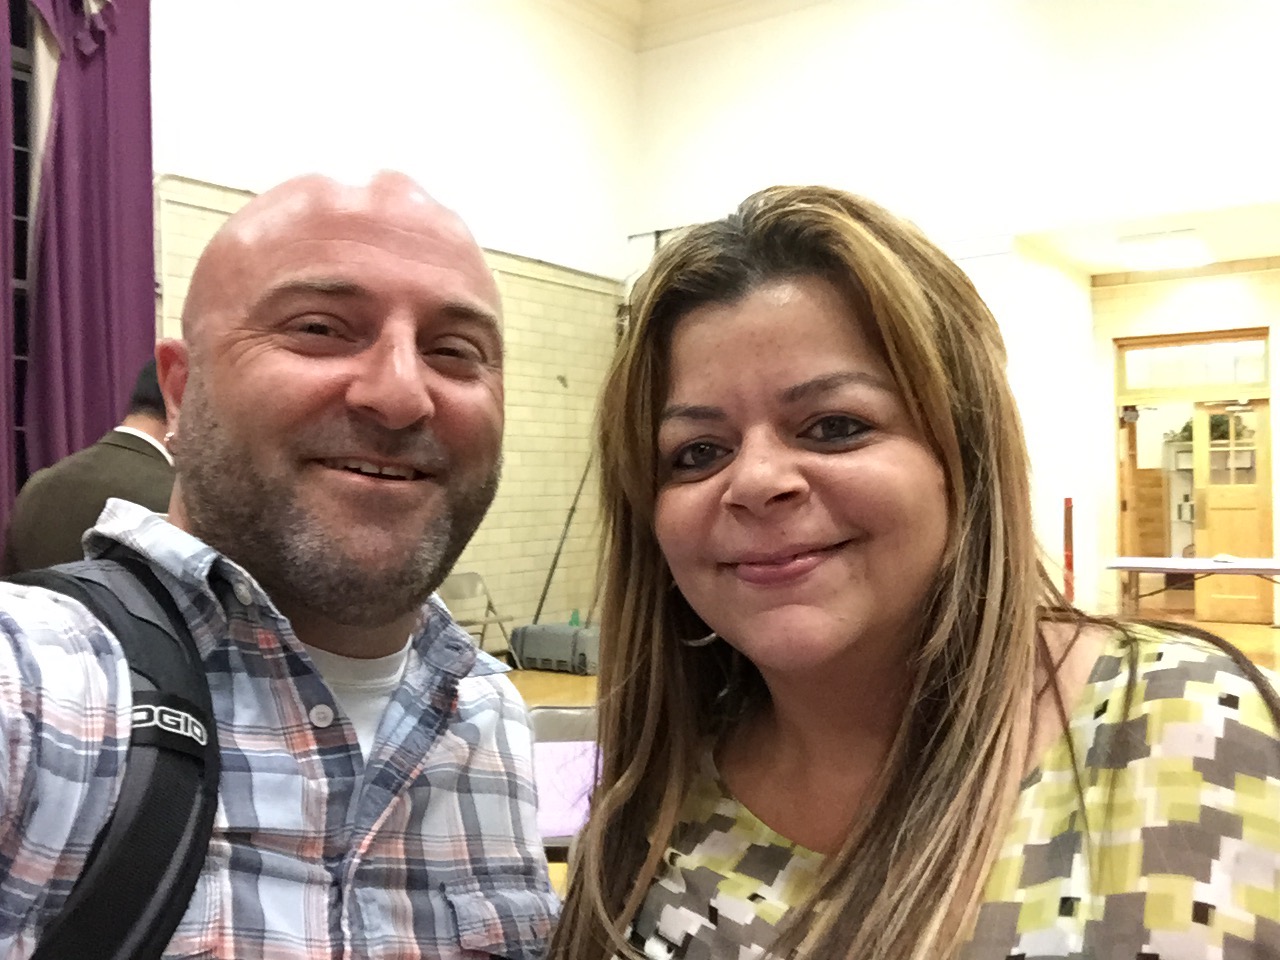   Mayor's Ward 4 Liaison Jasmin Benab poses for a selfie with Drew at an ANC 4D meeting, Aug 18, 2015.  